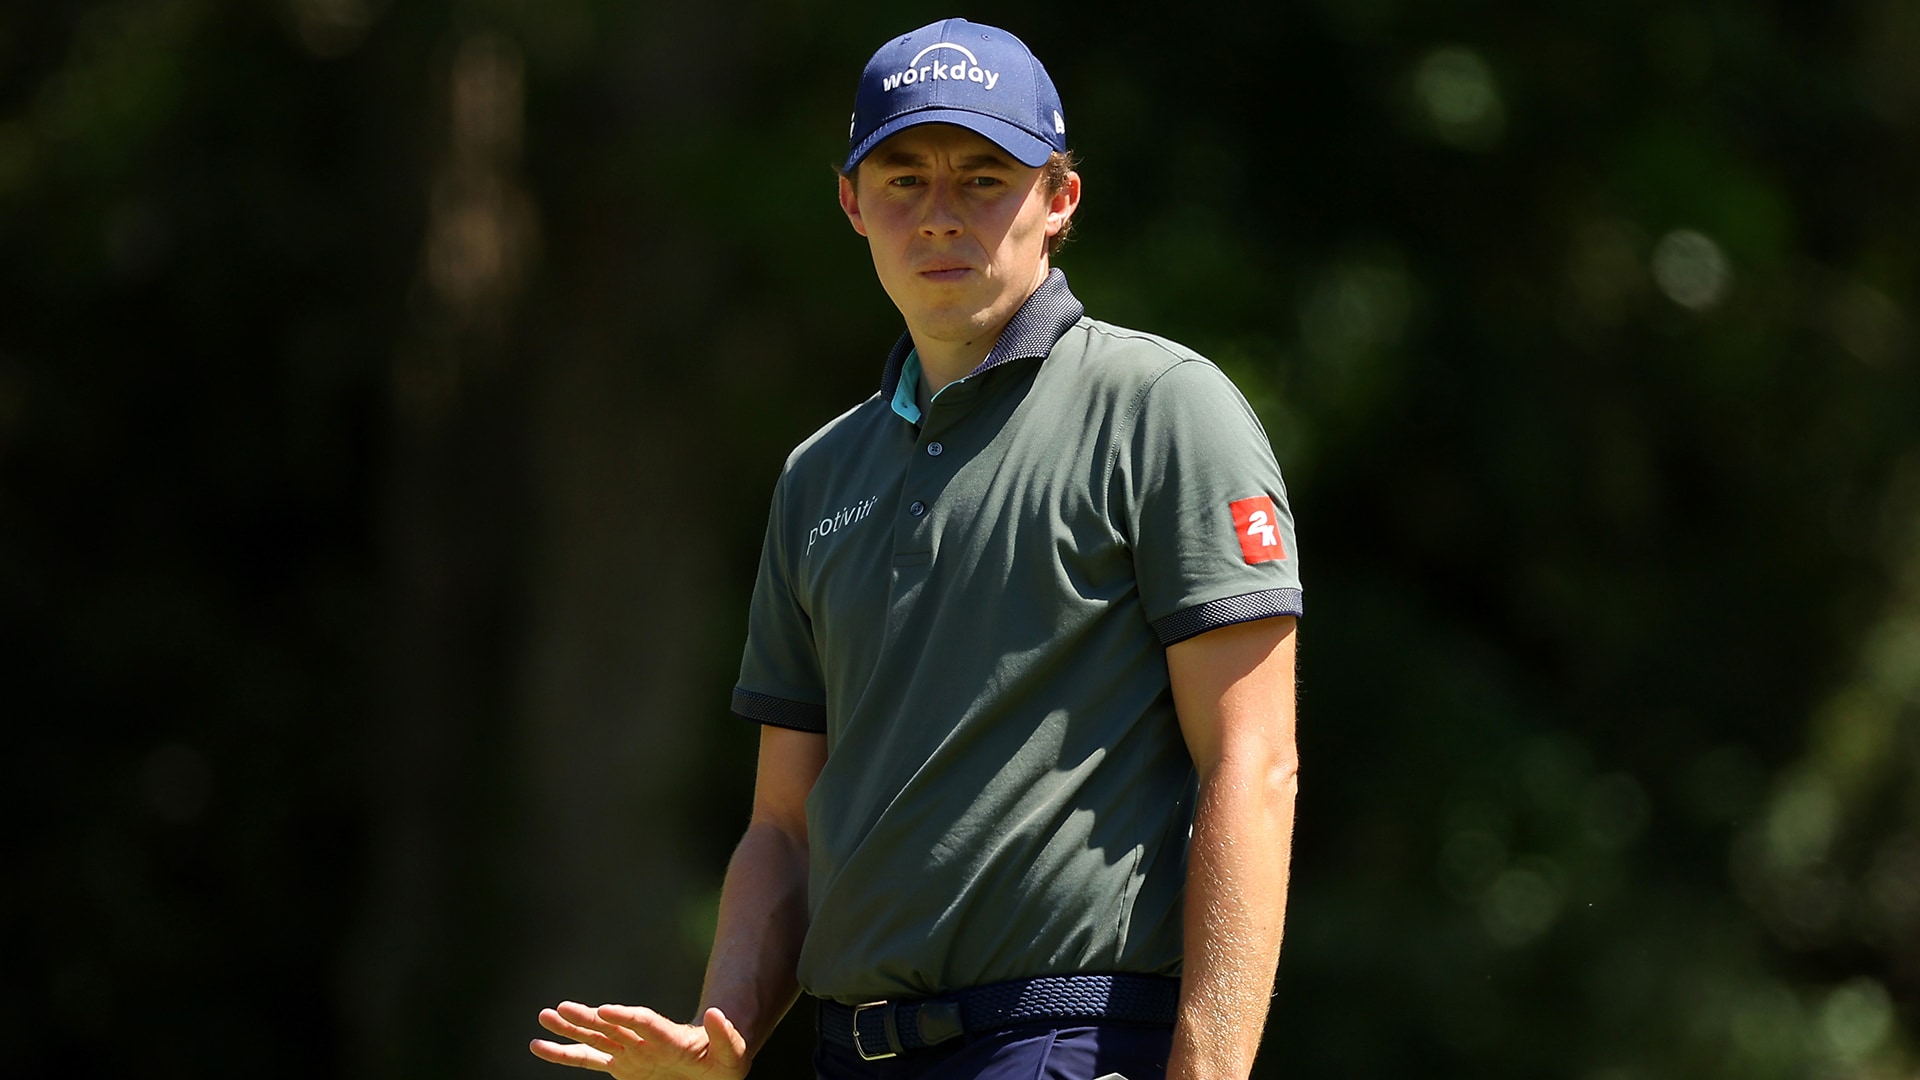 Matt Fitzpatrick loves bogey-free rounds, shooting 63 and Harbour Town